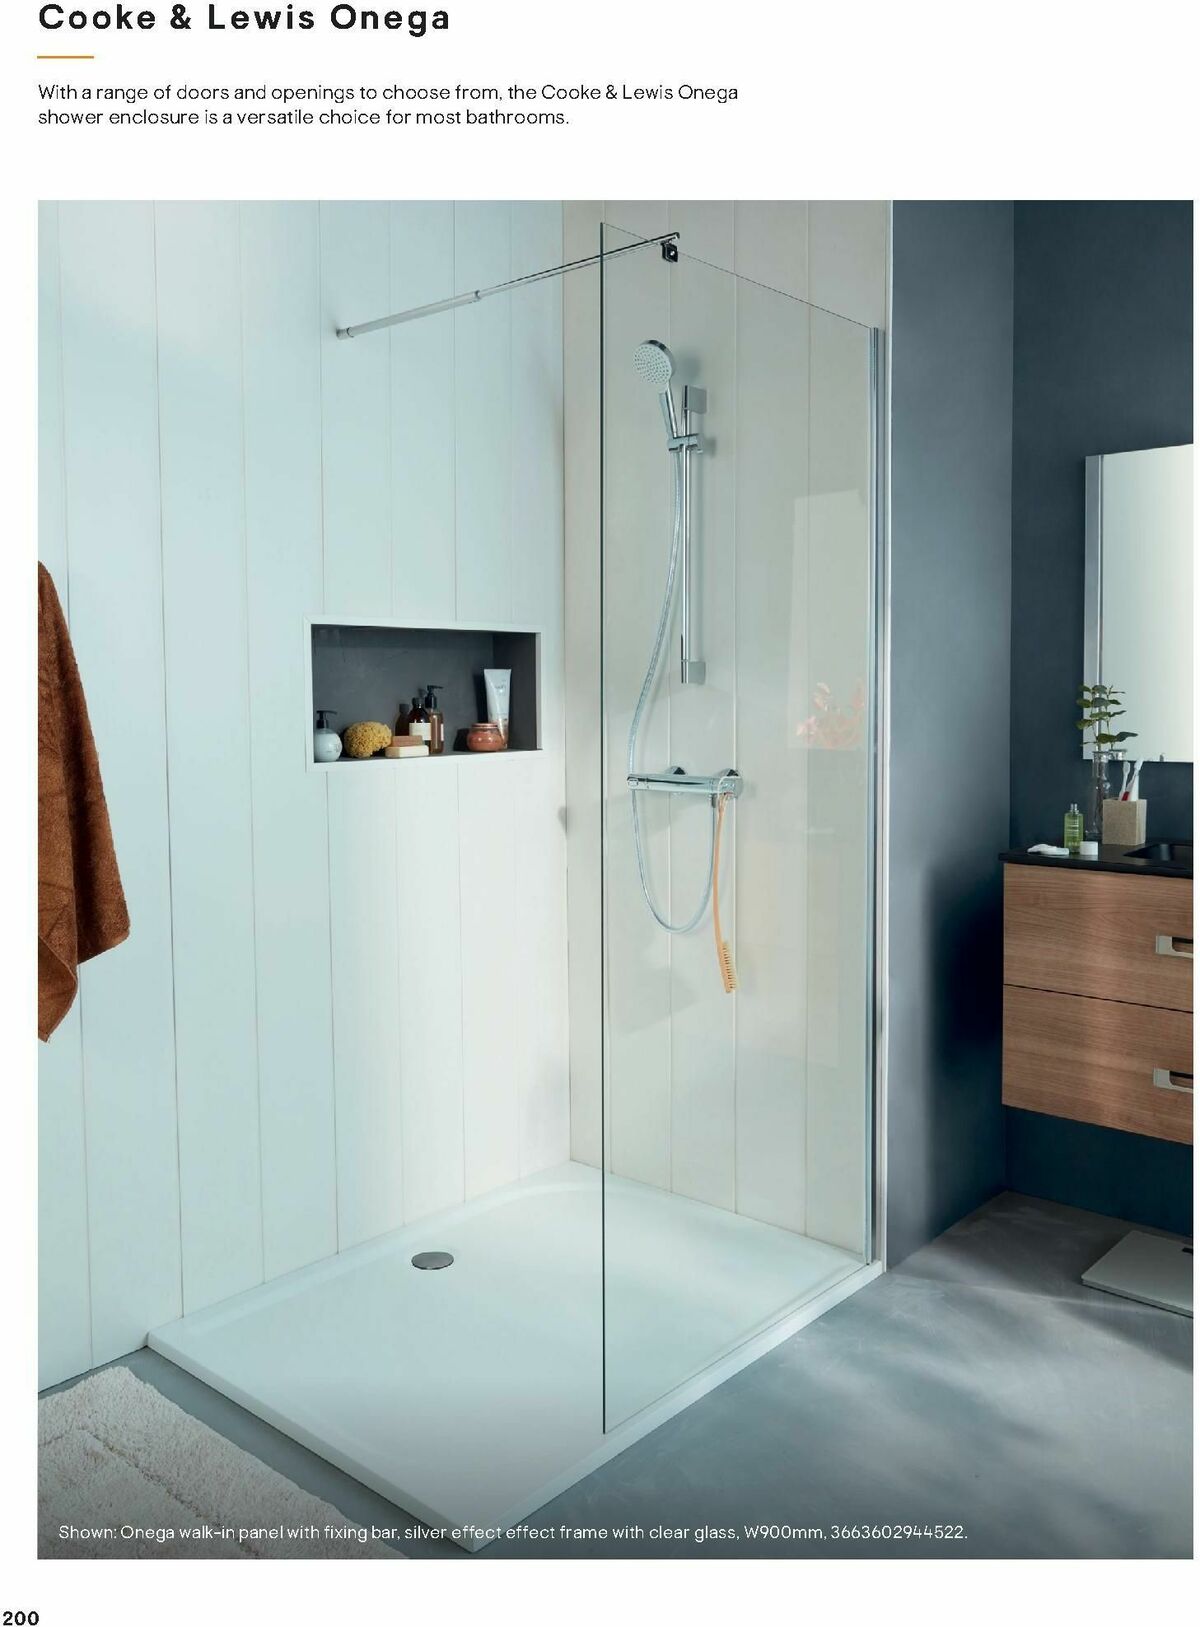 B&Q Bathrooms Offers from 15 January